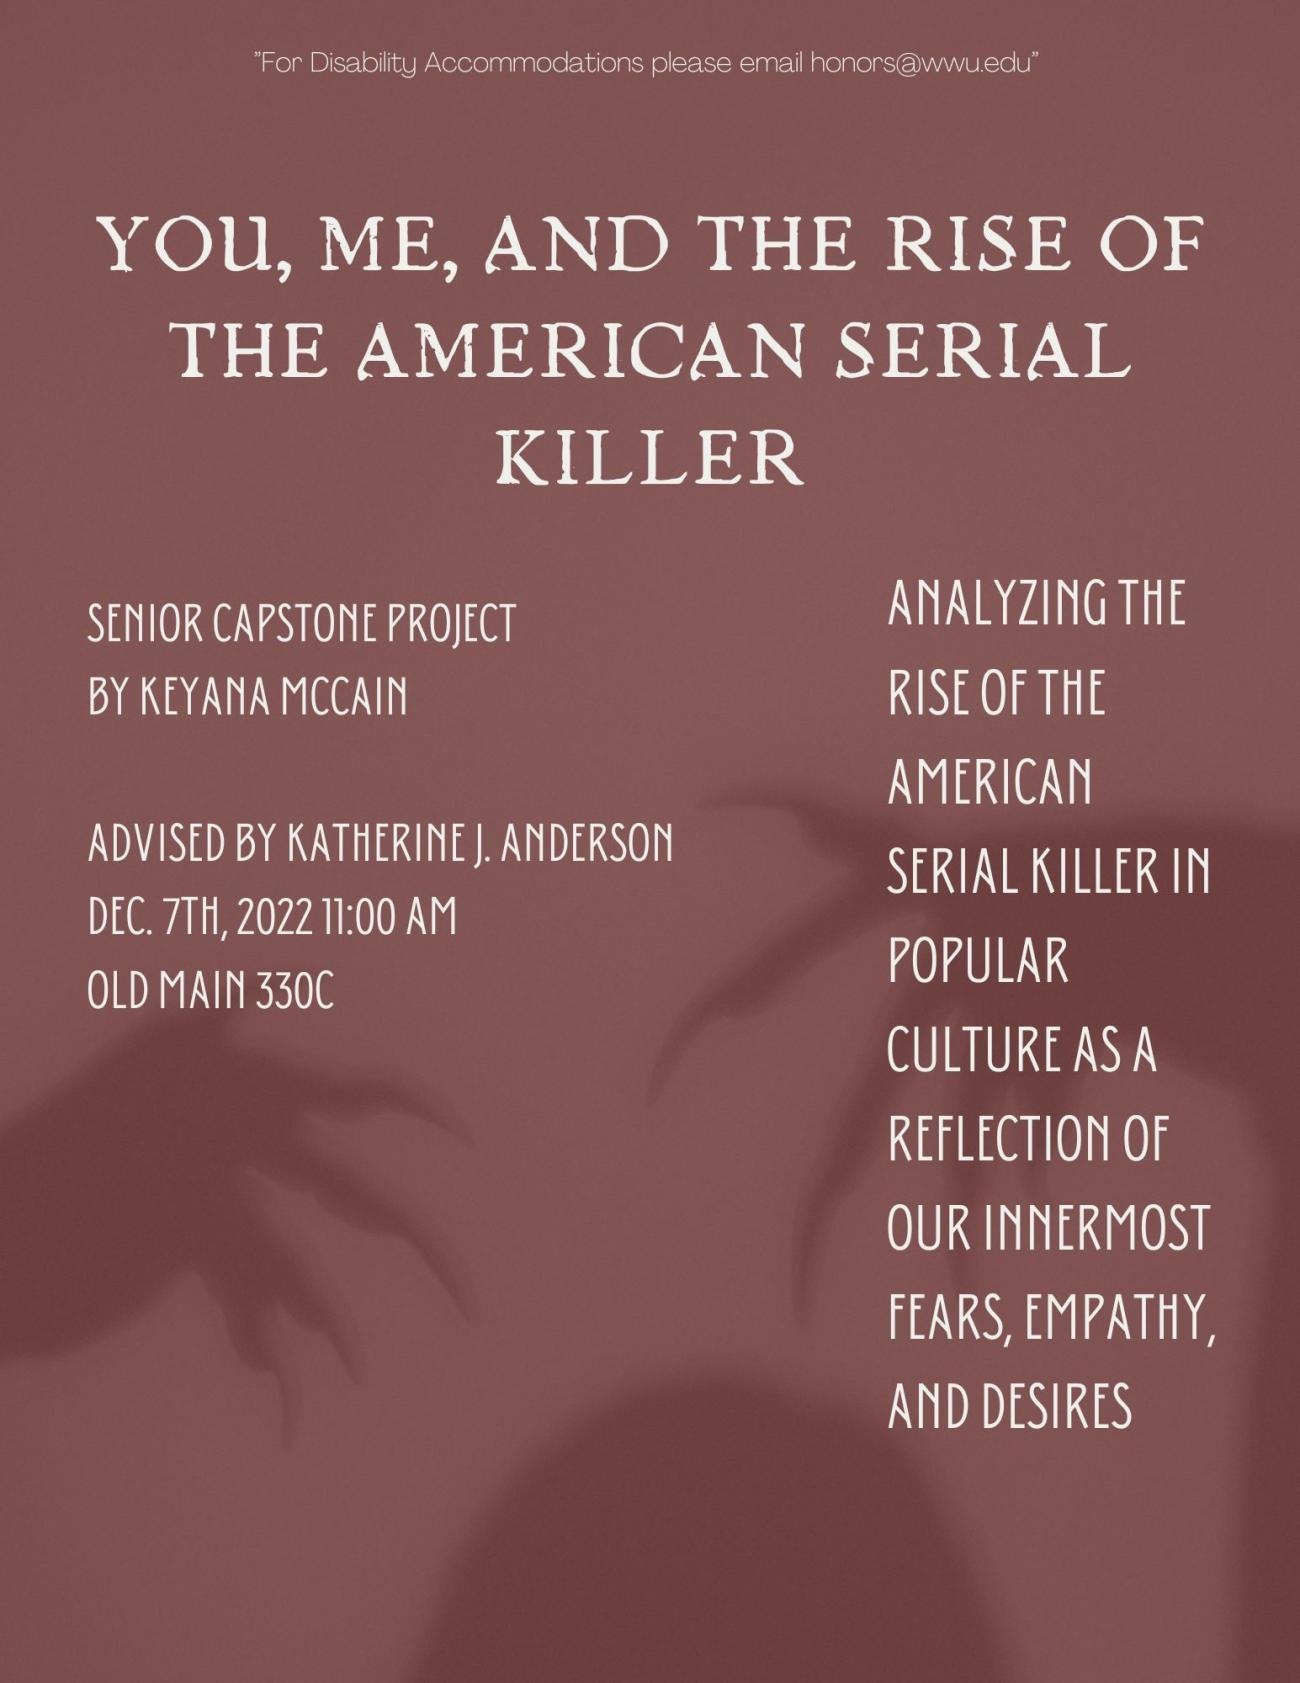 A poster with a plain red background, overlayed with the shadow of a monstrous looking figure with long claws. The text reads “You, Me, and the Rise of the American Serial Killer: Analyzing the rise of the American serial killer in popular culture as a reflection of our own innermost fears, empathy and desires. Senior capstone project by Keyana McCain, Advised by Katherine J. Anderson, December 7th, 2022 at 11 am in Old Main 330 C."